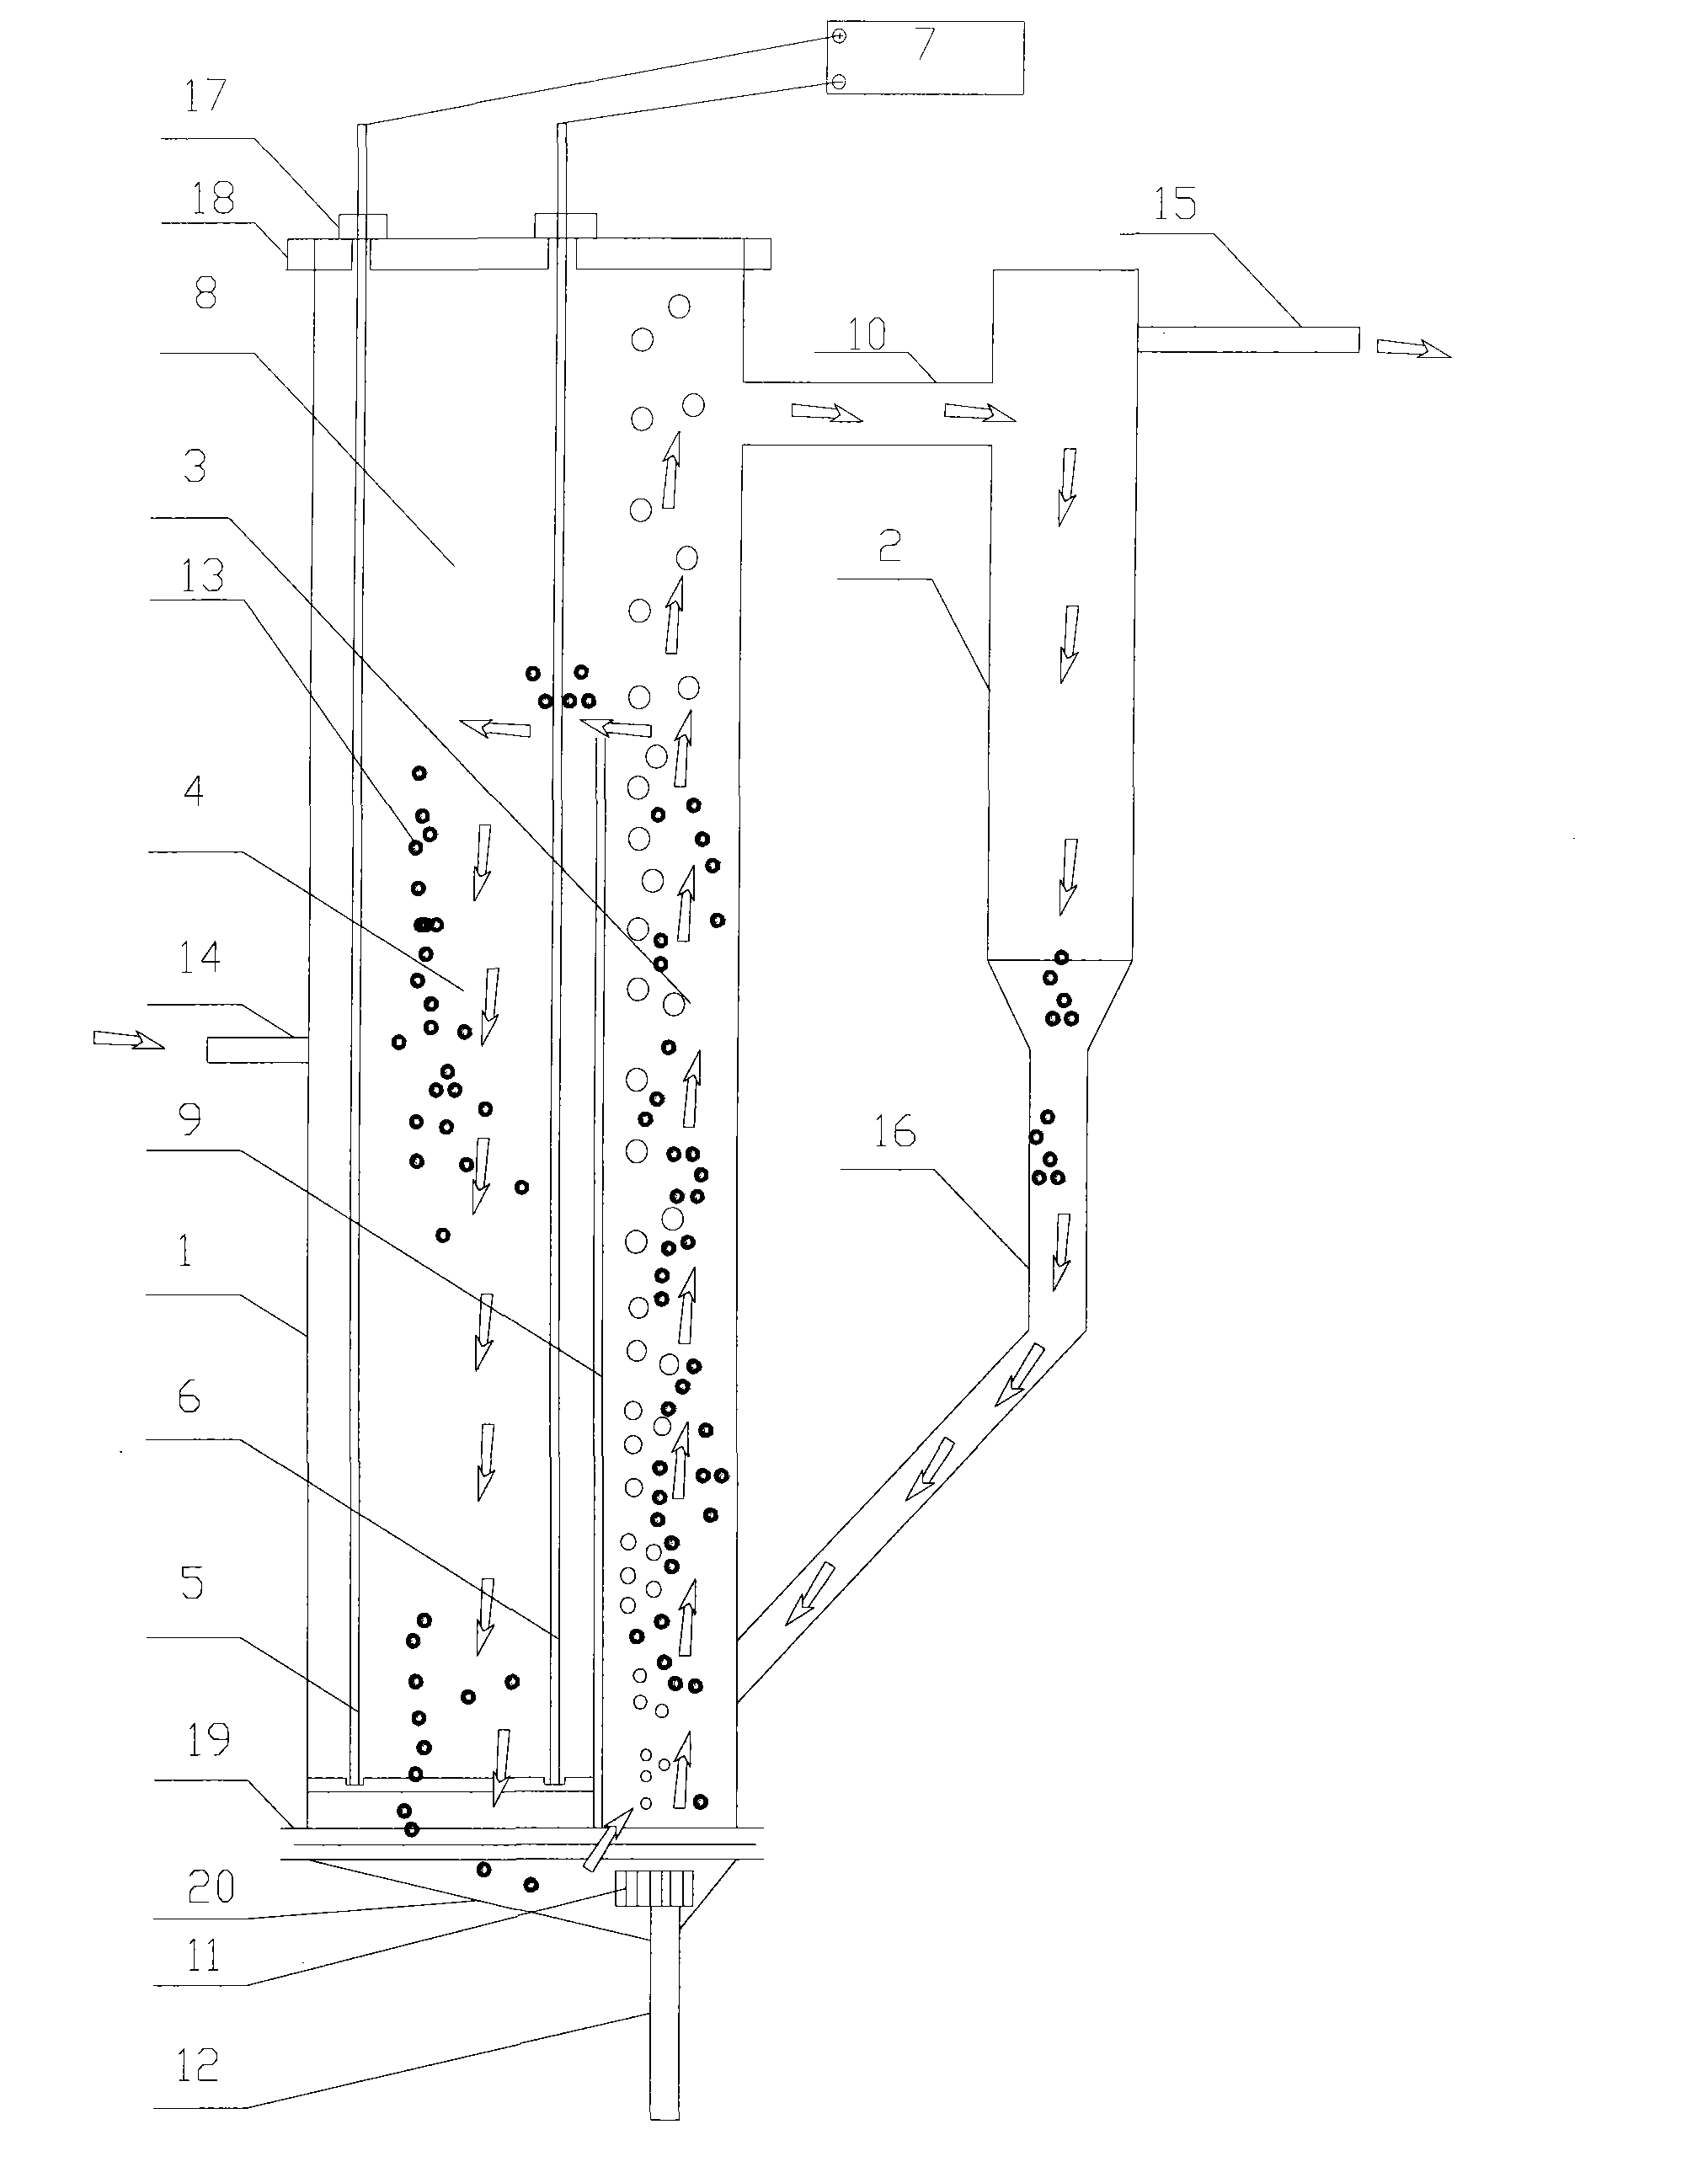 Electrolytic and catalytic oxidation reaction device and processing method based fluidized bed